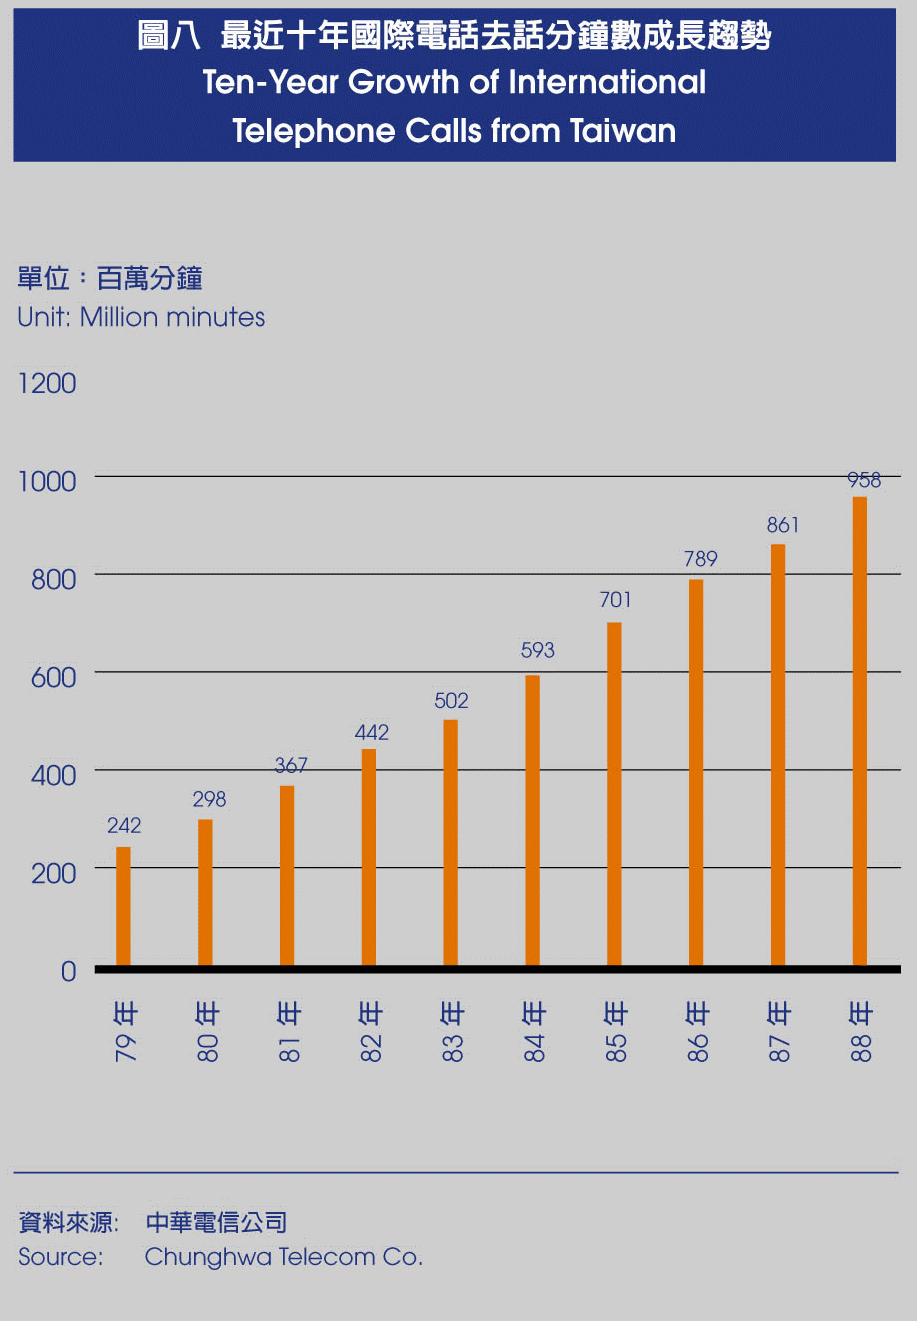 Ten-Year Growth of International Telephone Calls from Taiwan